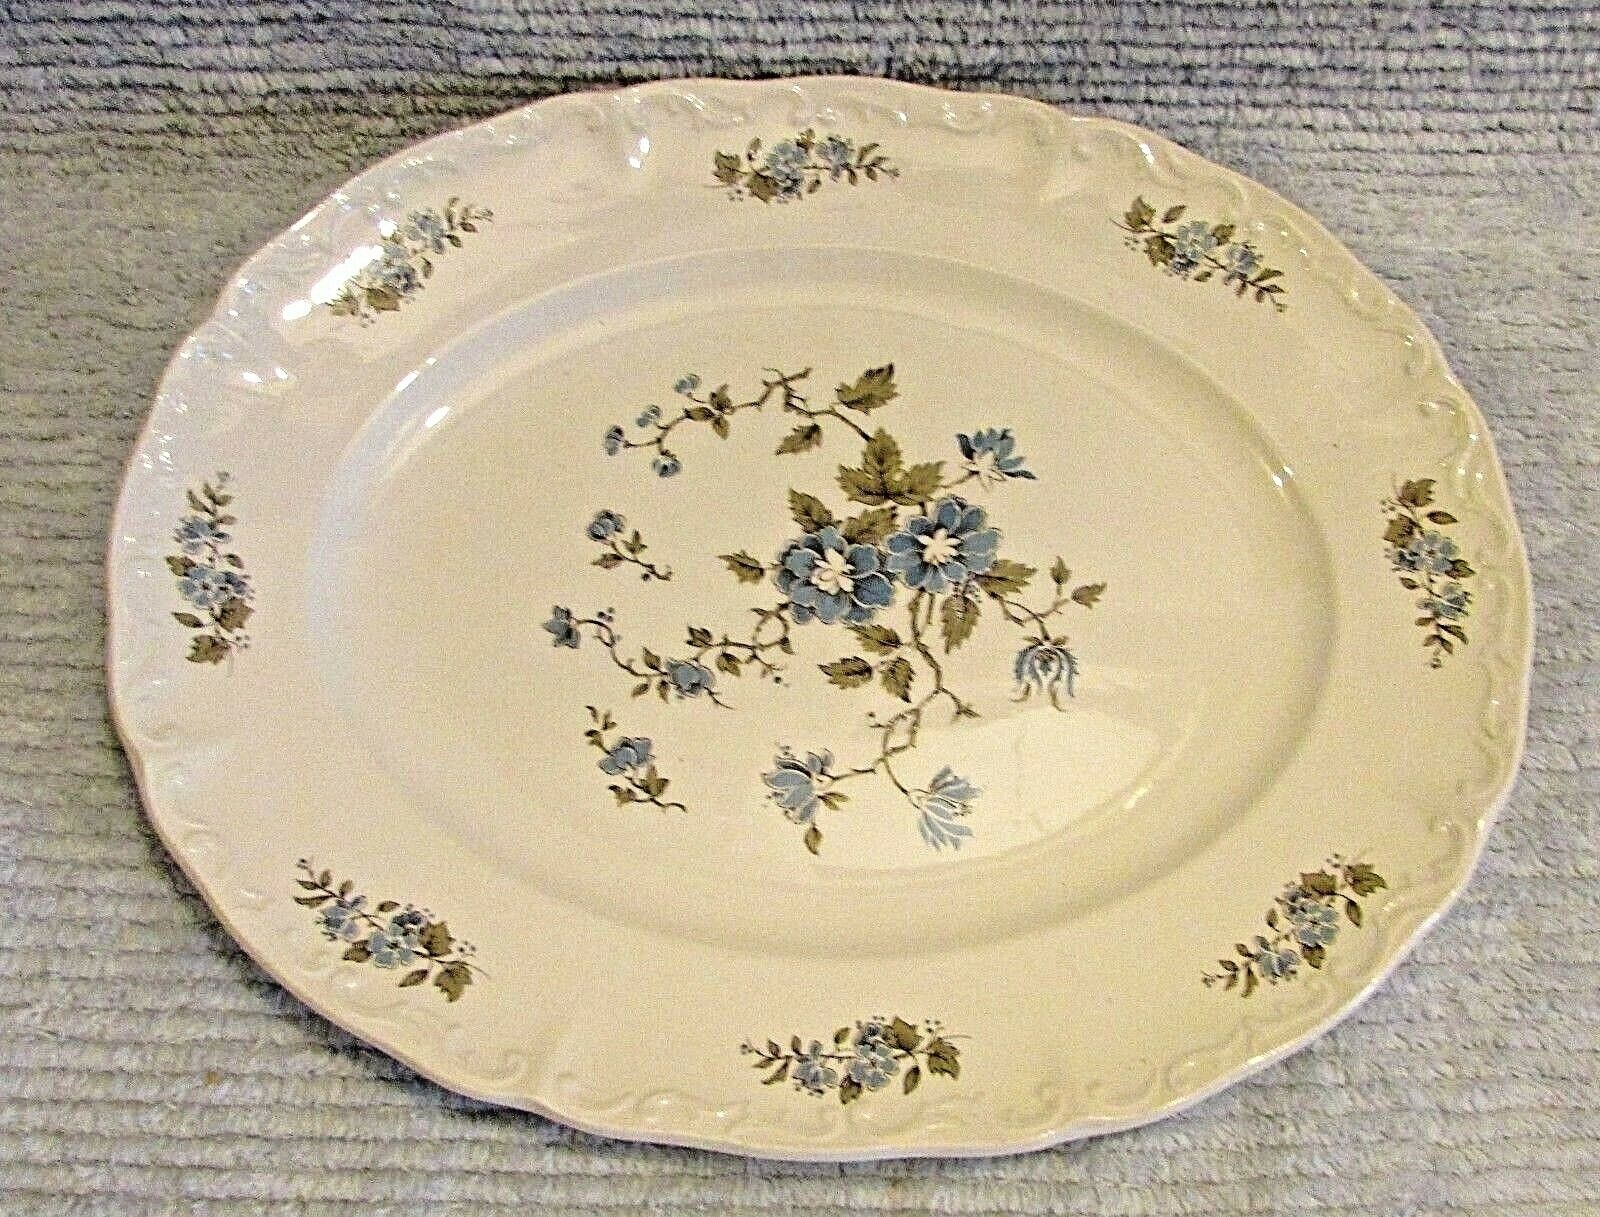 Blossomtime Staffordshire England Hand Decorated Ironstone 11x14 Platter FREE SH